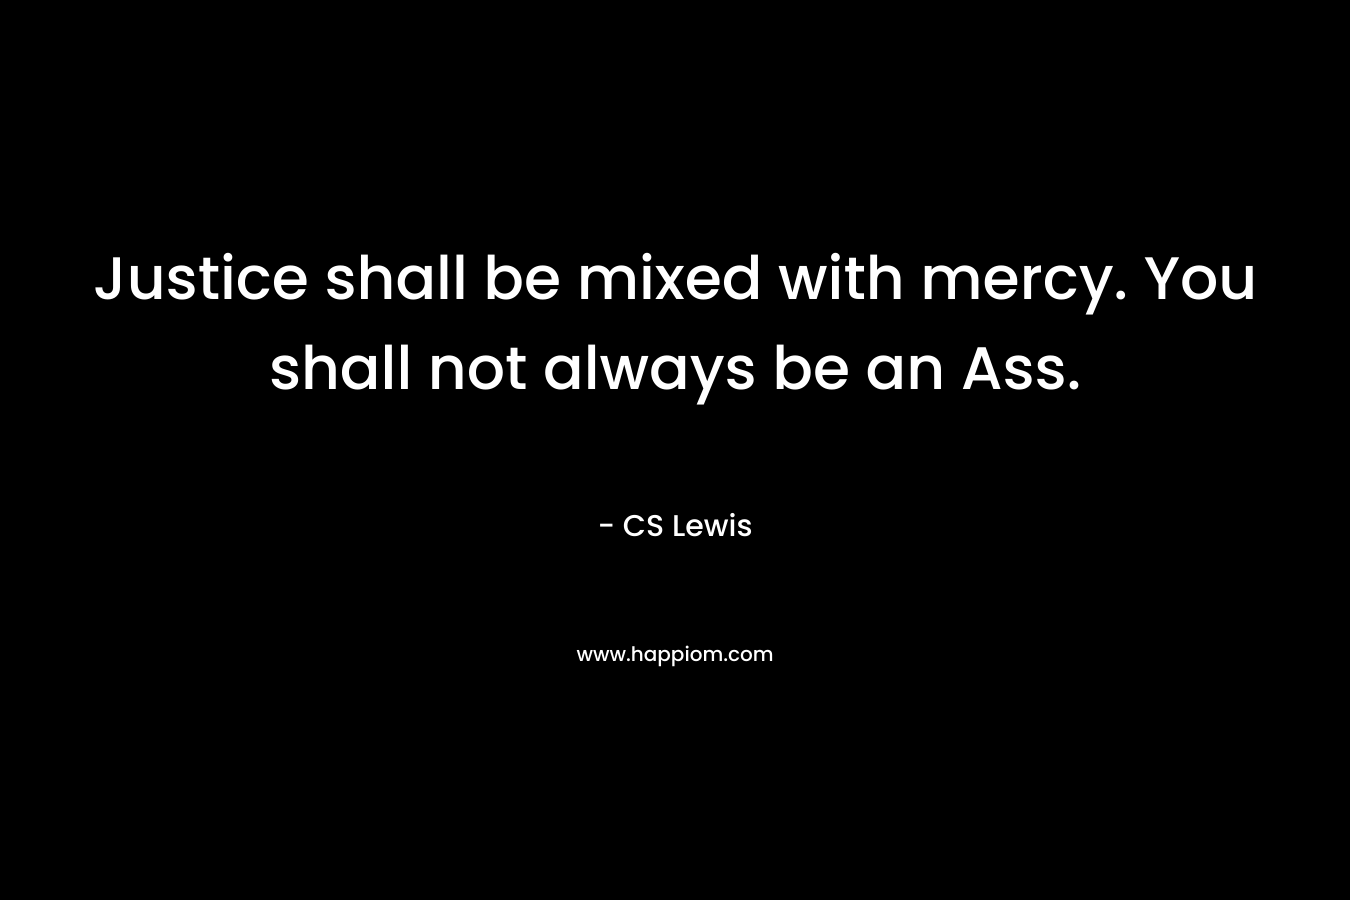 Justice shall be mixed with mercy. You shall not always be an Ass.